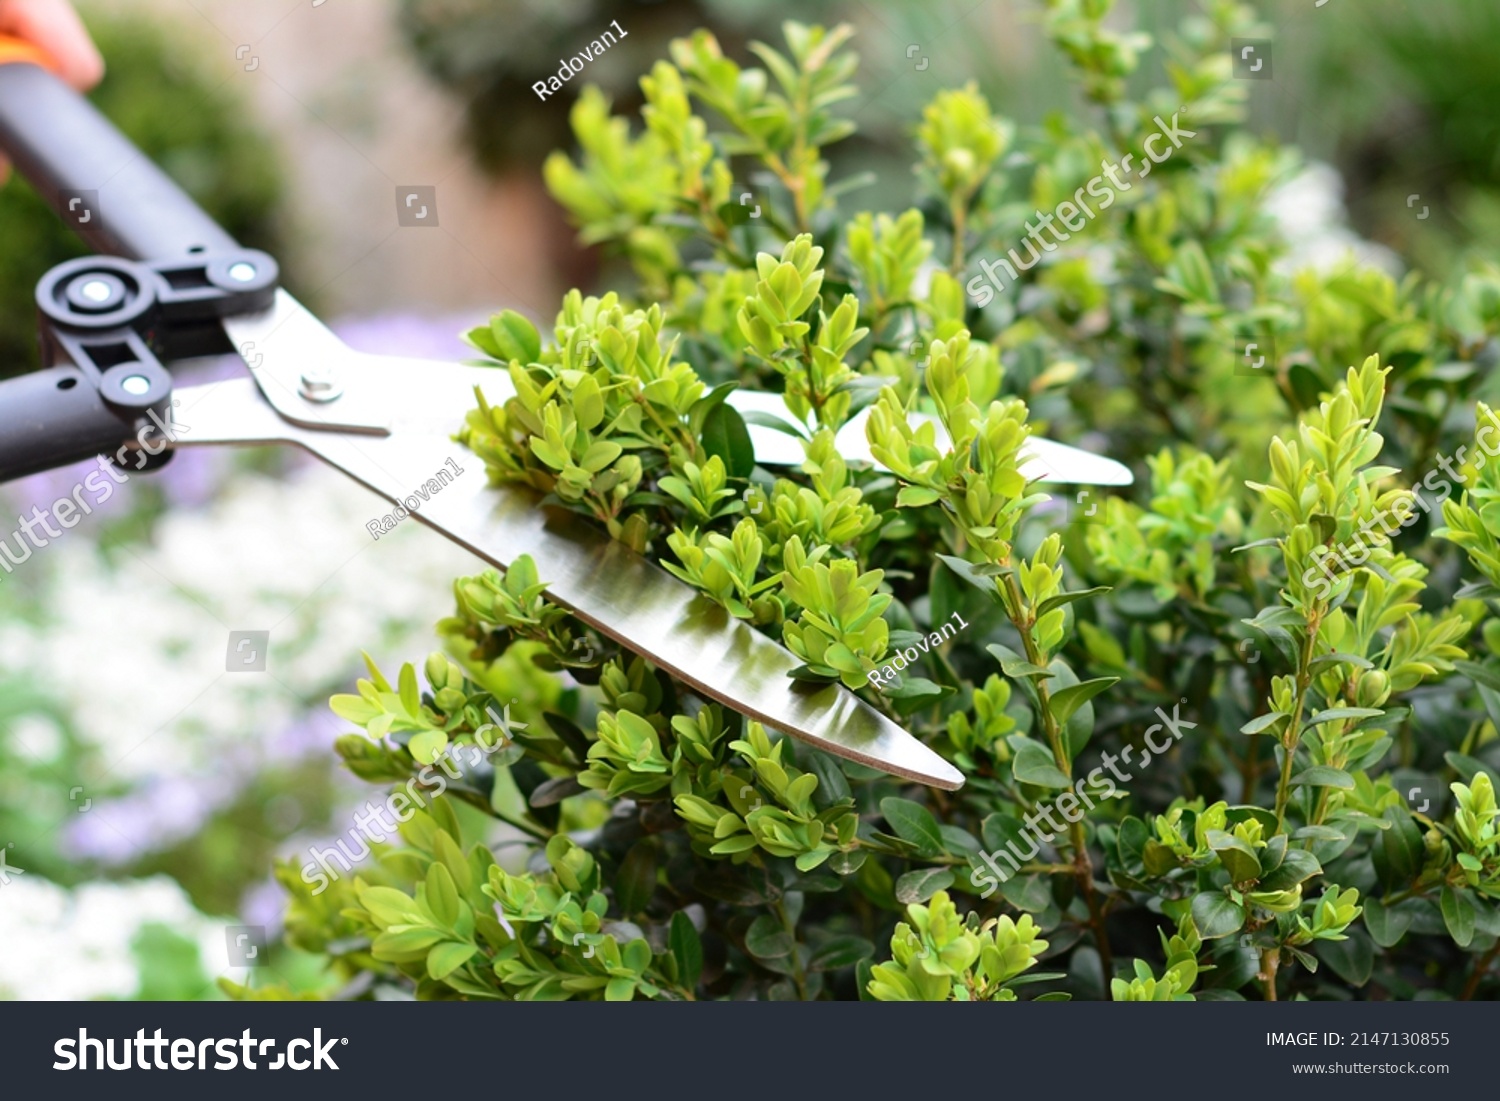 Pruning, trimming buxus, boxwood shrubs with hedge shears. Cutting off buxus branches in the garden in spring. #2147130855